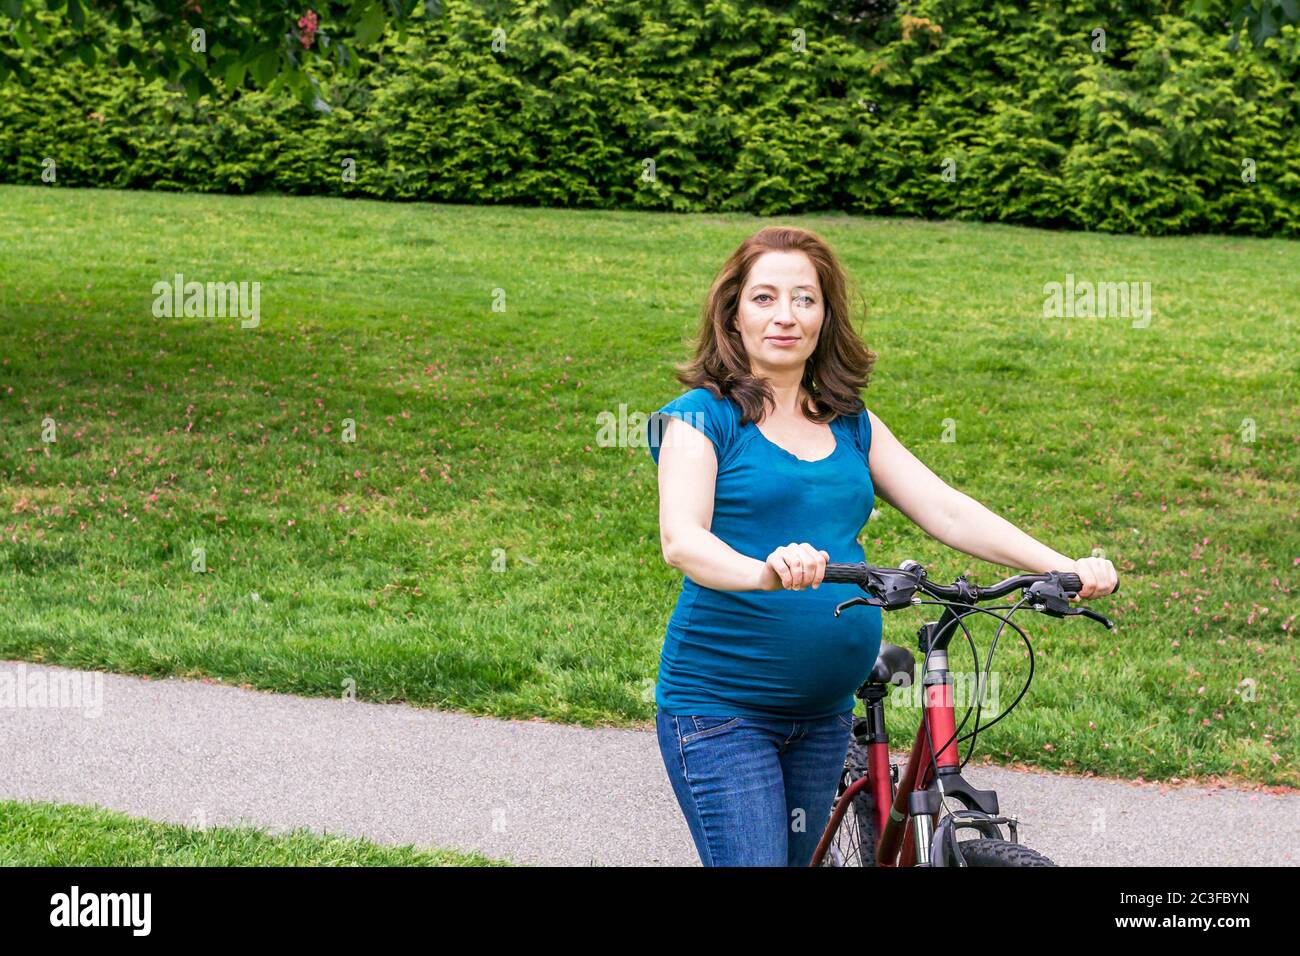 pregnant woman on the green lawn in a park holding bicycle ready to ride. Stock Photo